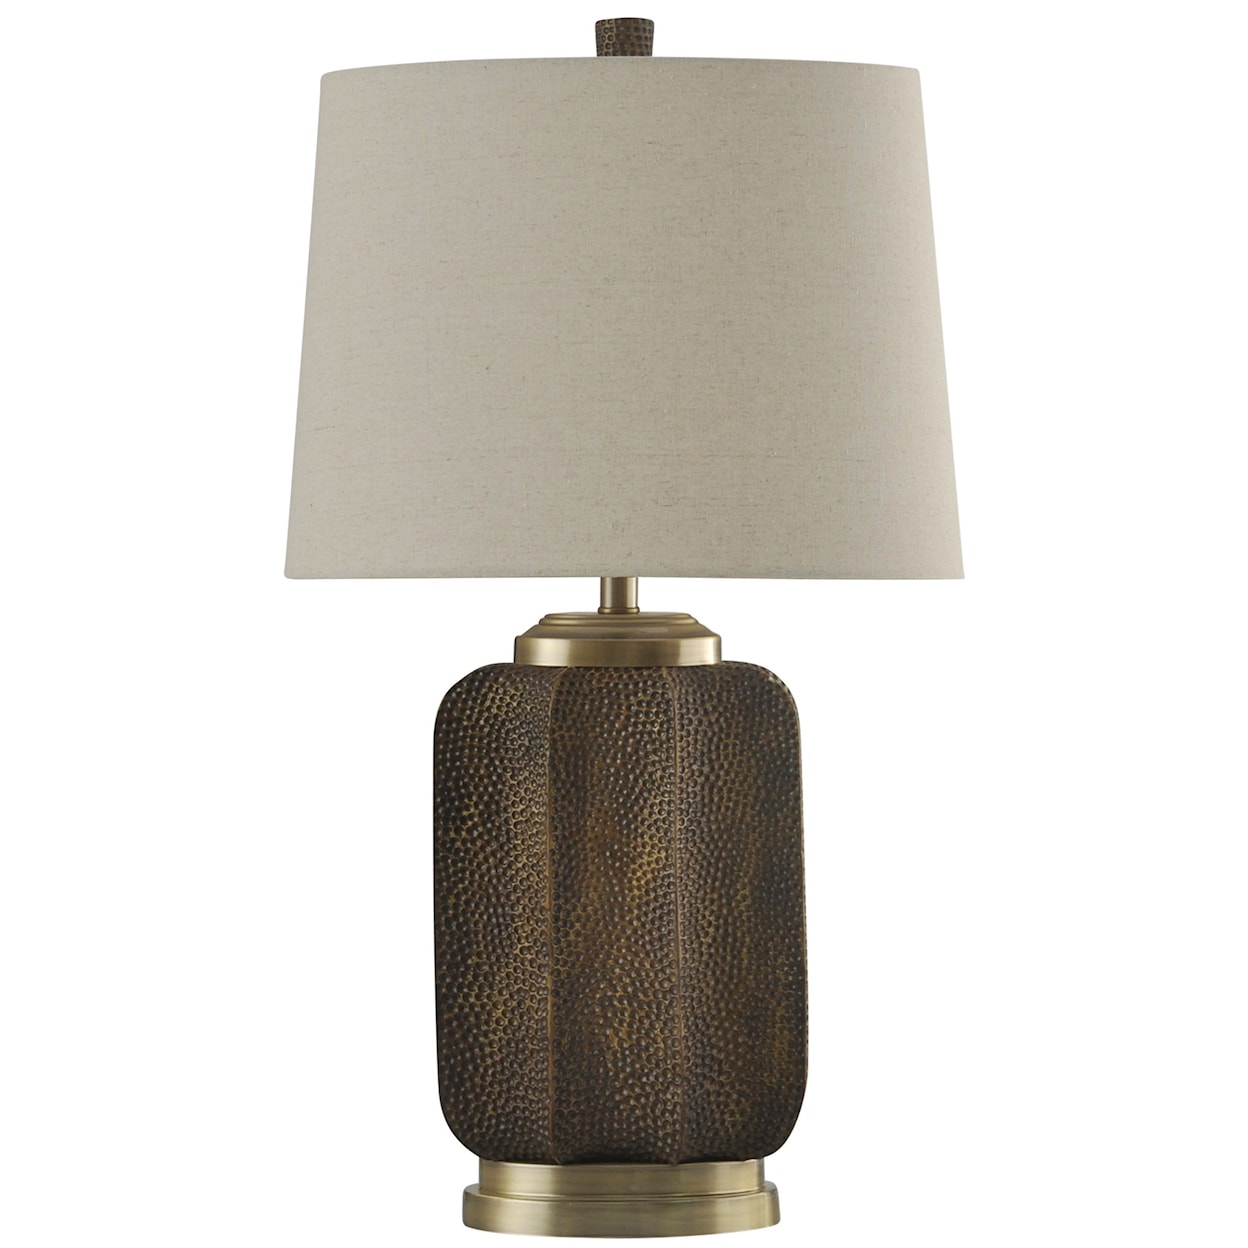 StyleCraft Lamps Transitional Steel & Resin Table Lamp